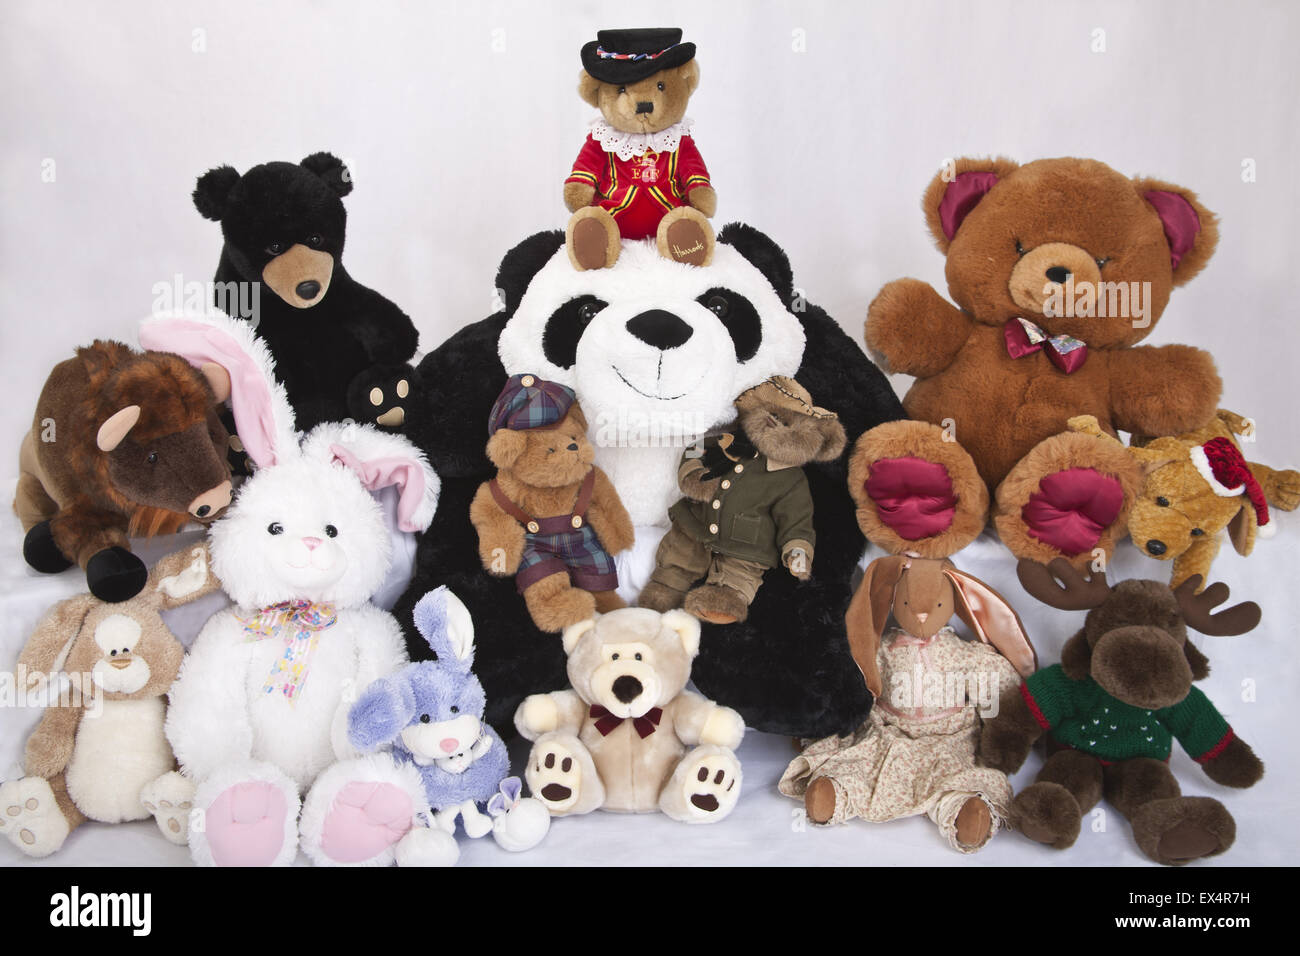 collection of stuffed animals